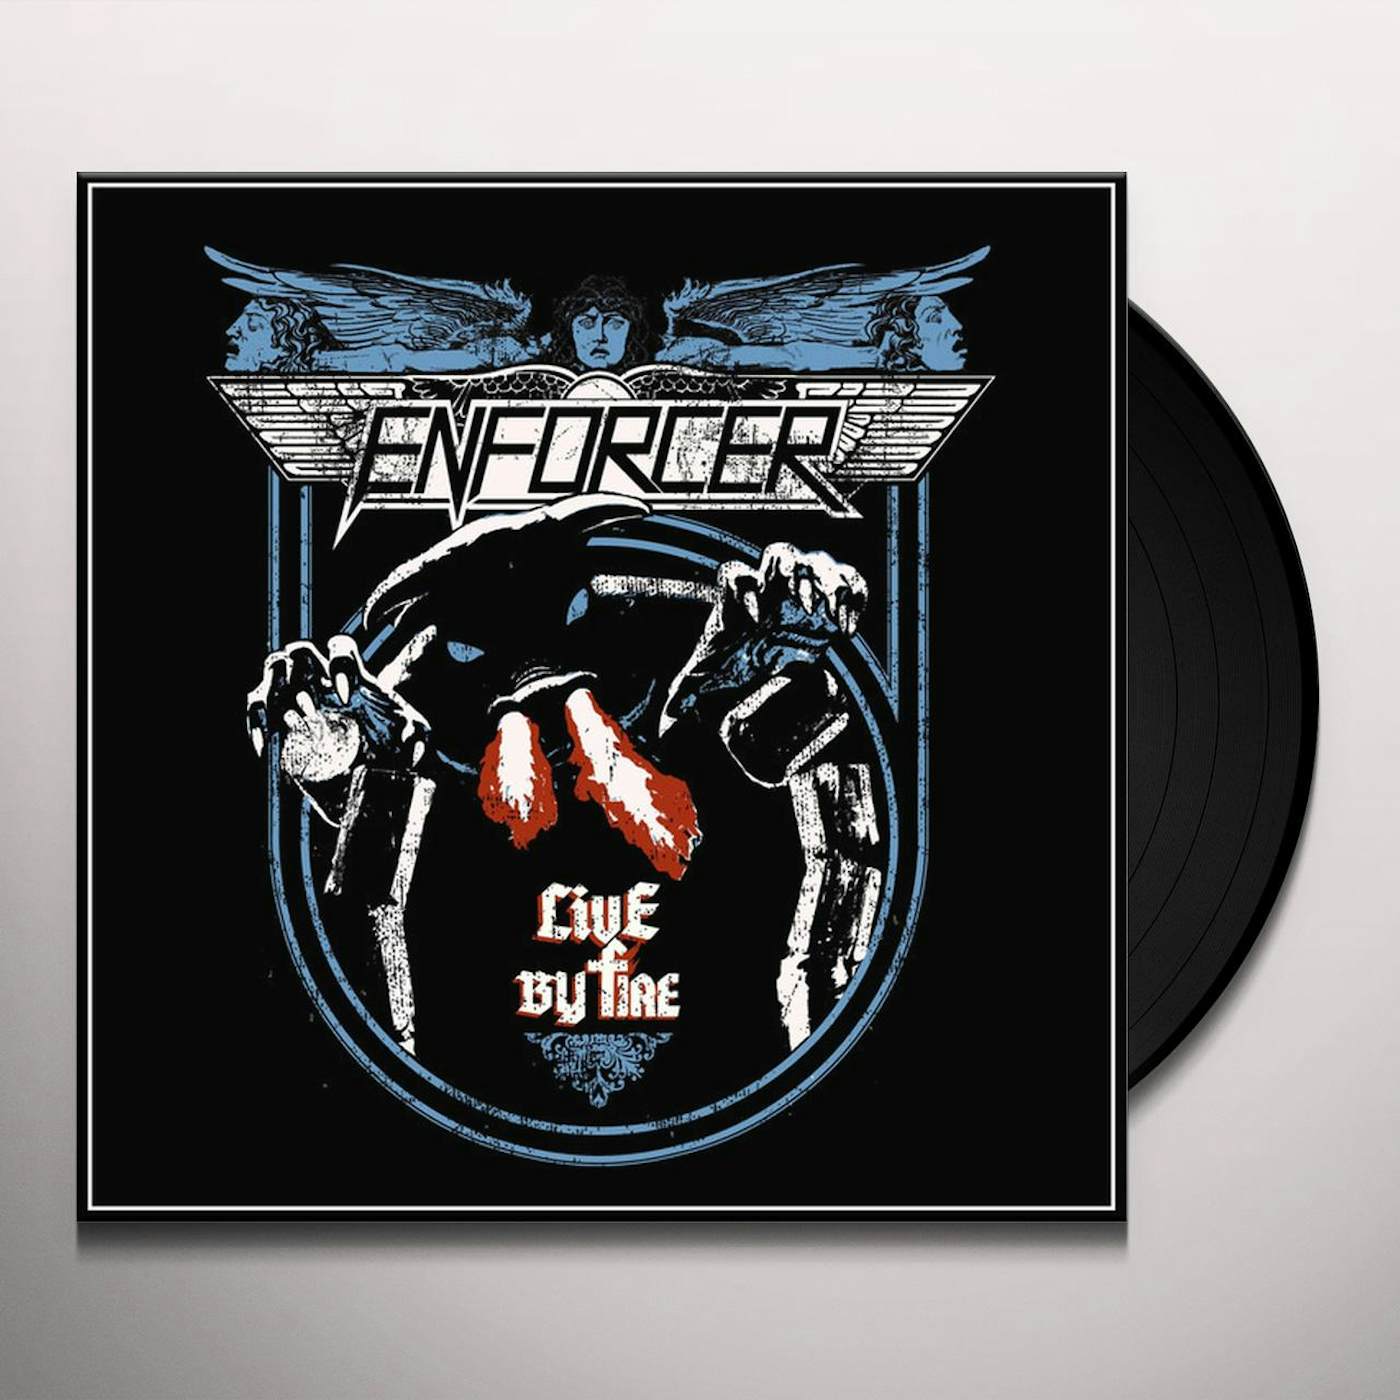 Enforcer Live by Fire Vinyl Record